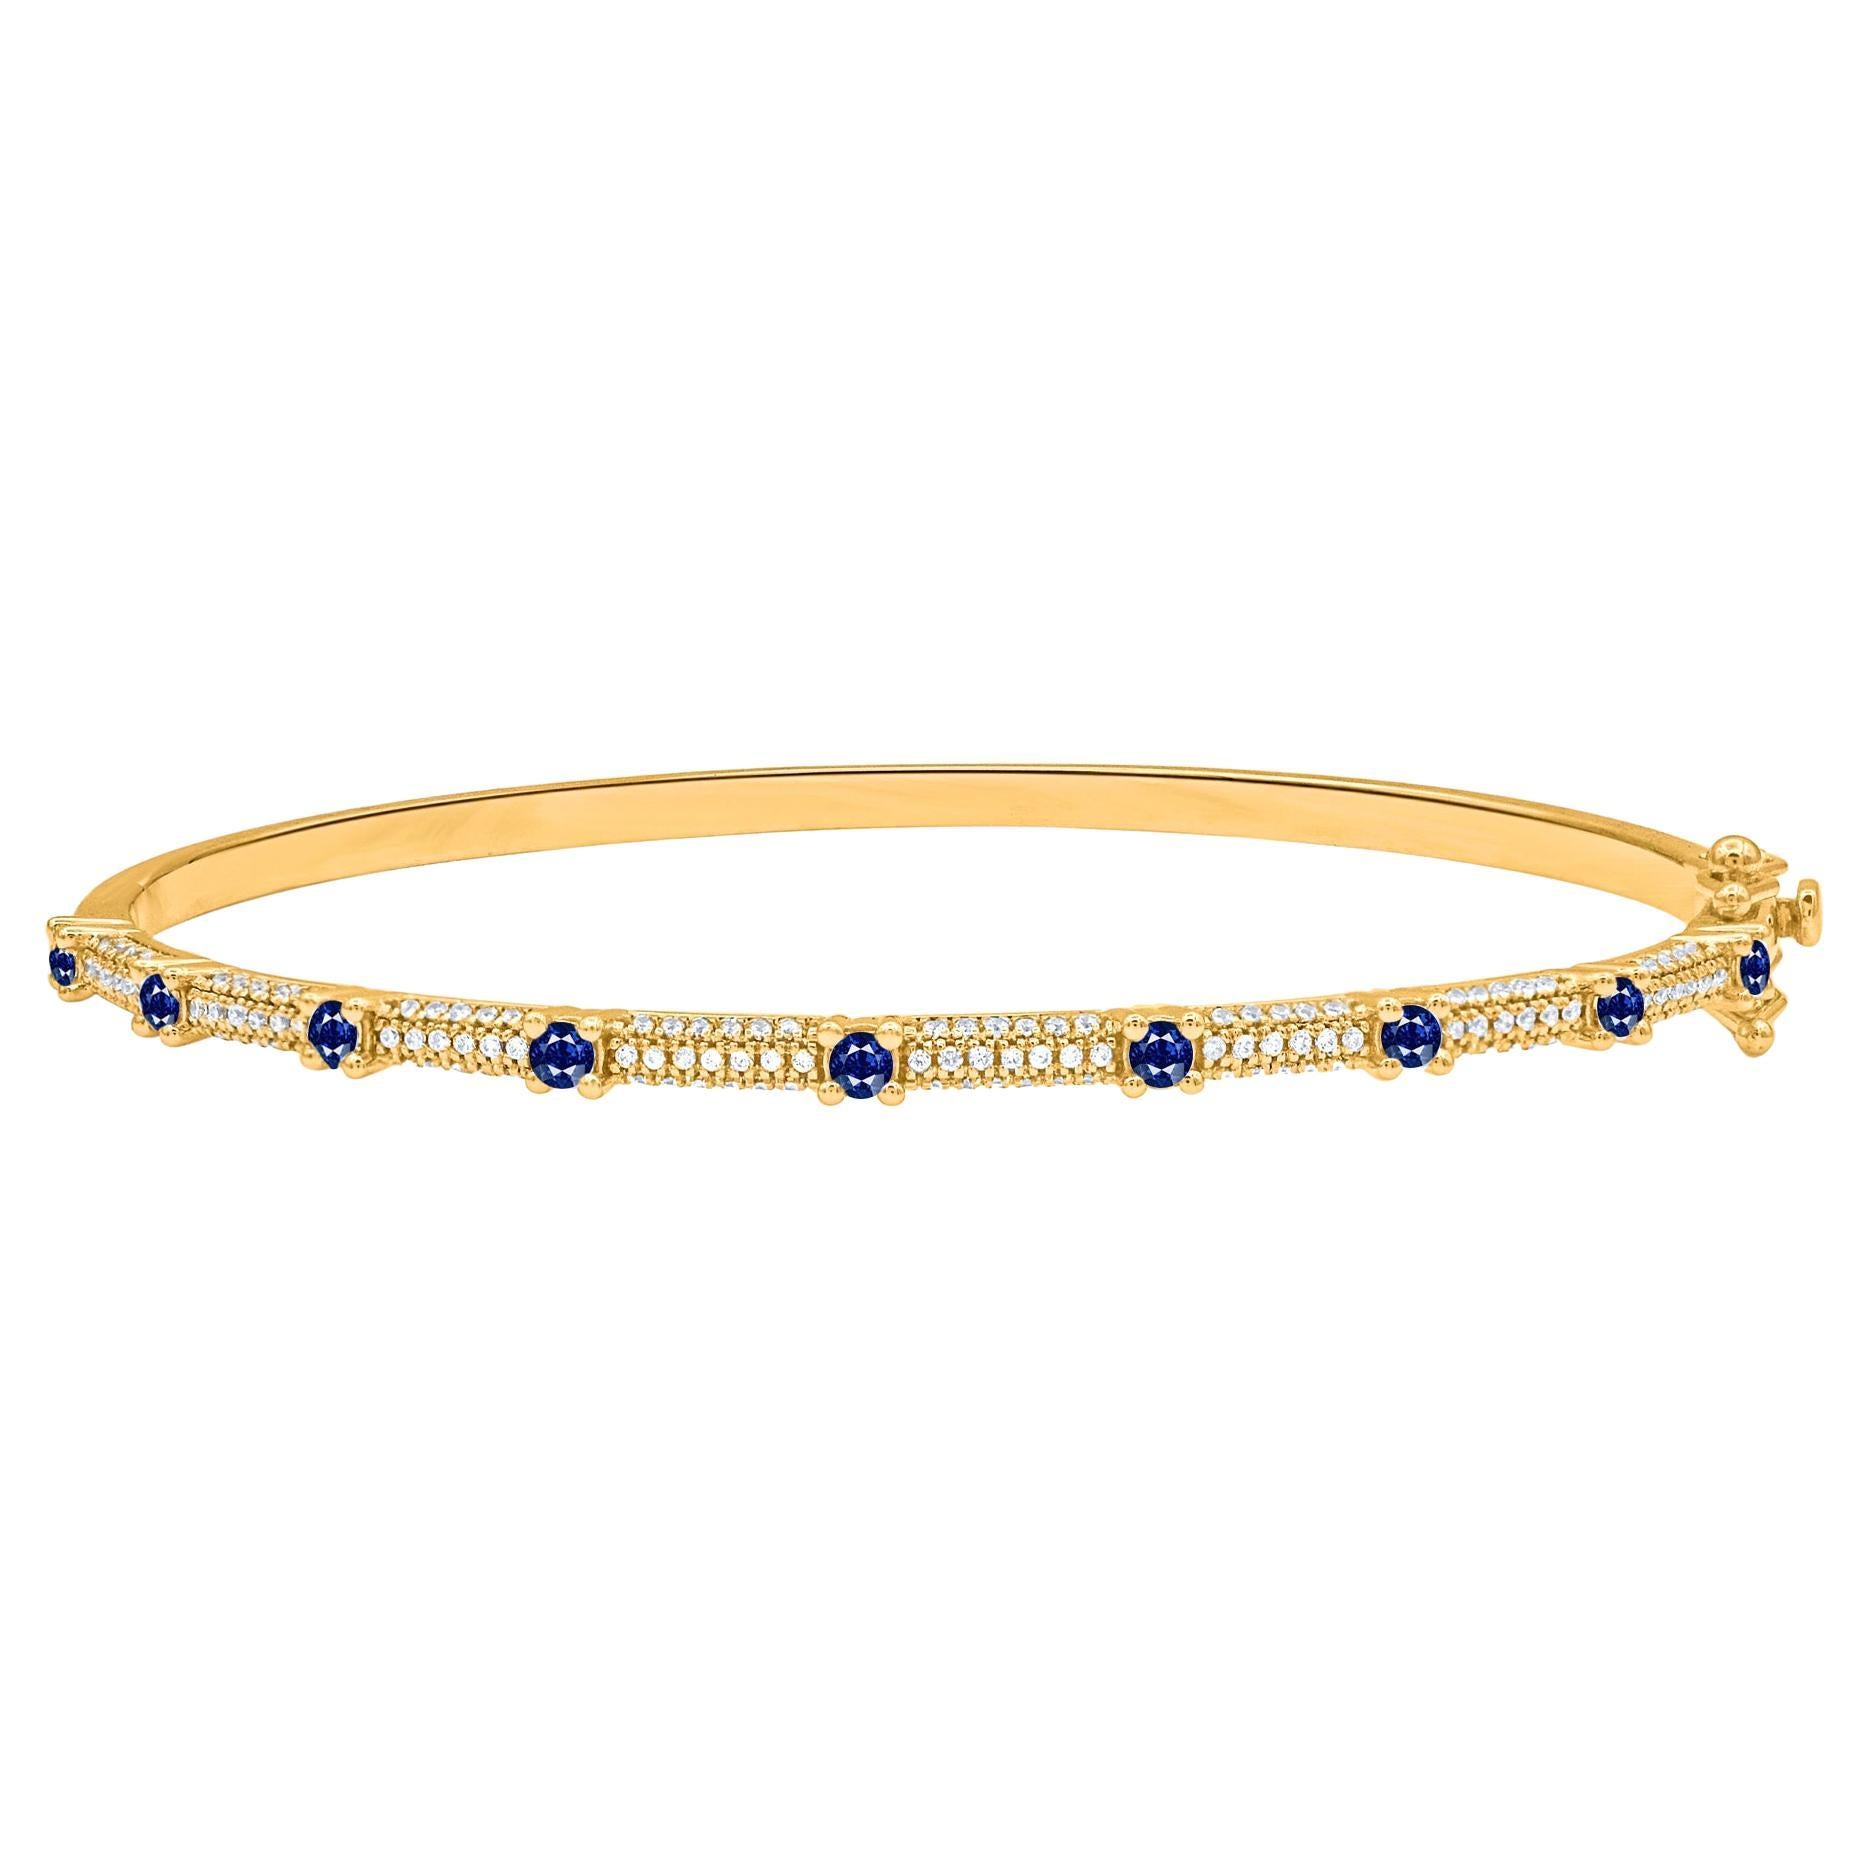 TJD 1.0 Ct Natural Diamond and Blue Sapphire Bangle Bracelet in 18KT Yellow Gold For Sale